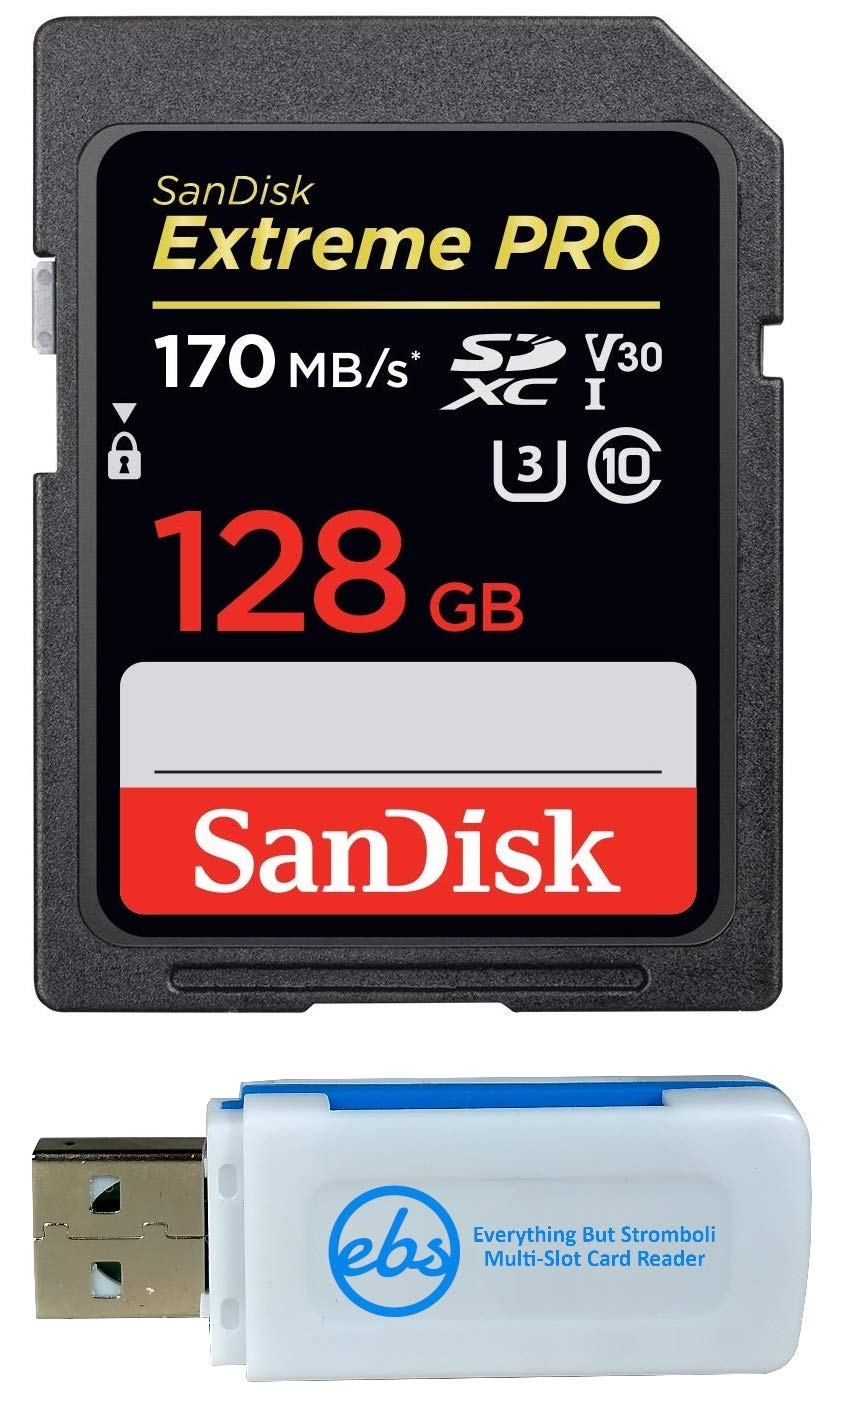 SanDisk 128GB SDXC Extreme Pro Memory Card Works with Canon EOS M3, M5, M6 Mirrorless Camera 4K V30 UHS-I (SDSDXXY-128G-GN4IN) with Everything But Stromboli Combo Reader Class 10 128GB